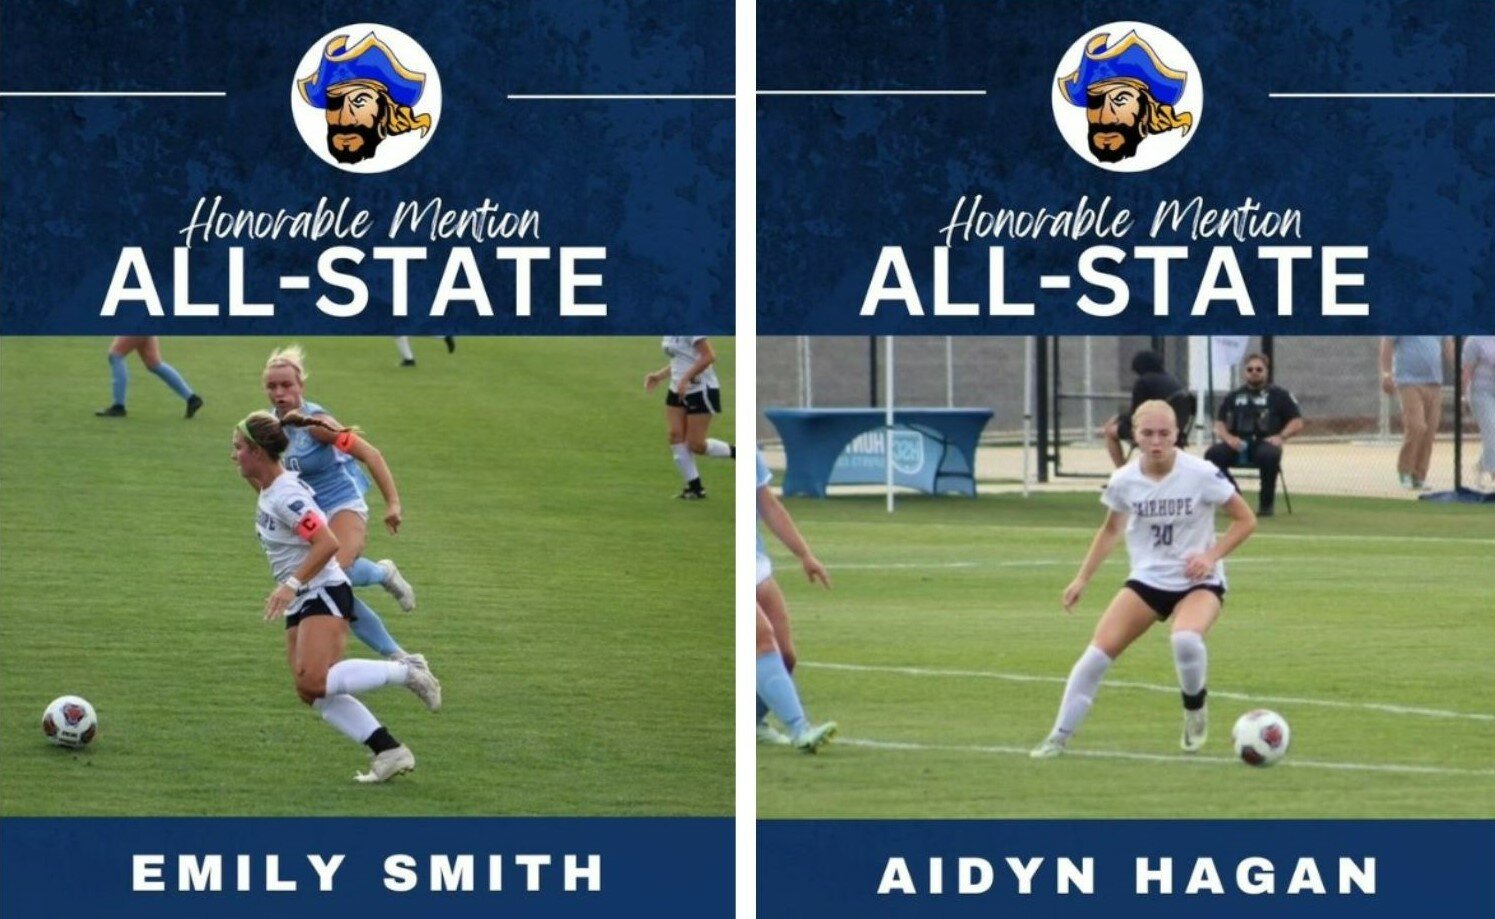 Emily Smith and Aidyn Hagan, as well as Emma Coffey, Ansley Warner, Peyton Davis and Harper Duffy, were all named to the AHSAA soccer coaches’ all-classification, all-state team as honorable mentions. The Fairhope Pirates’ six selections was tied for the most in Baldwin County among the 77 total local all-state representatives.